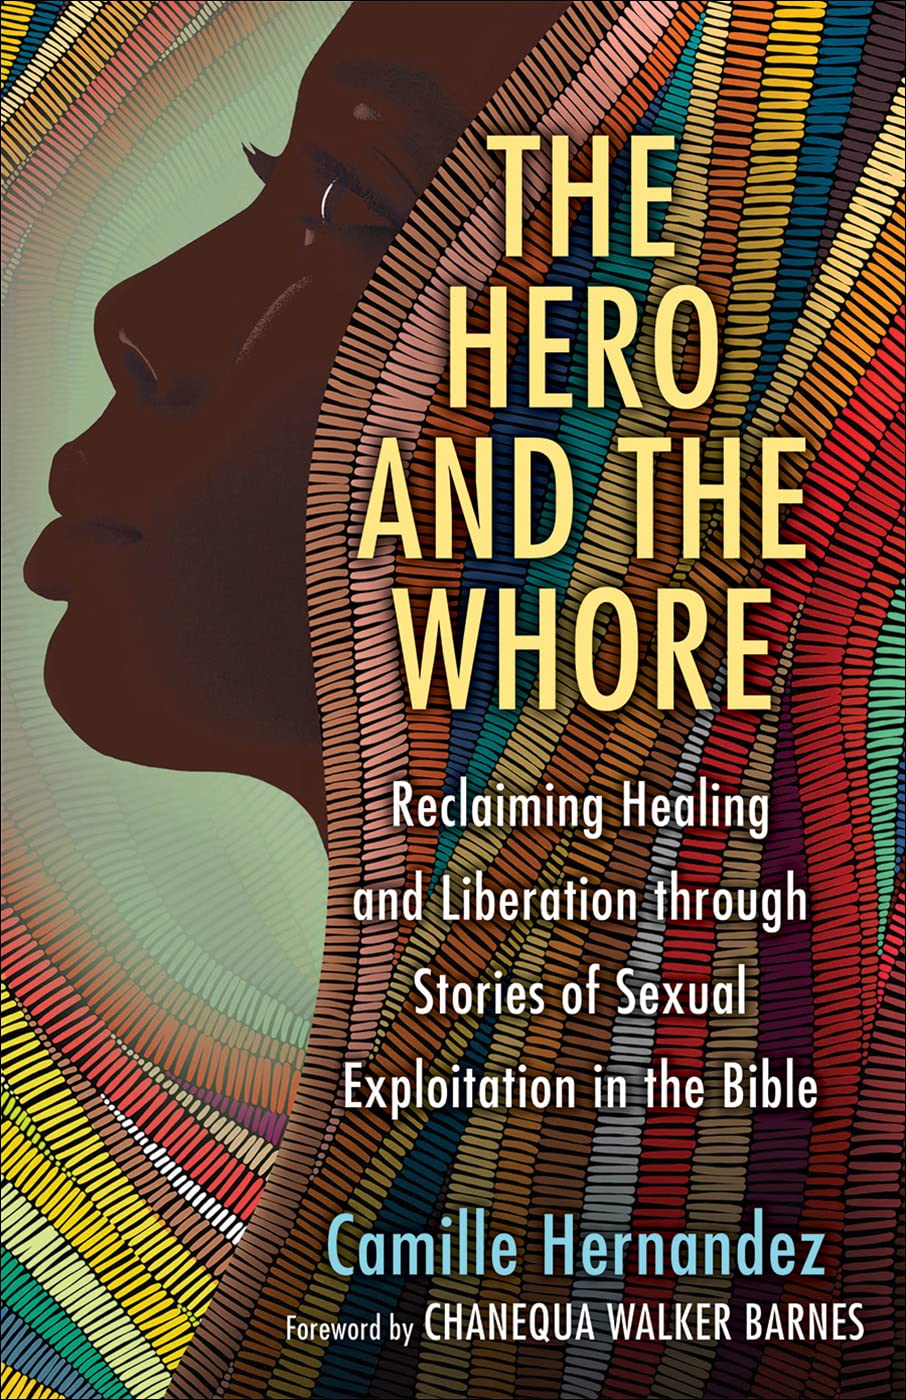 Book cover for "The Hero and the Whore"